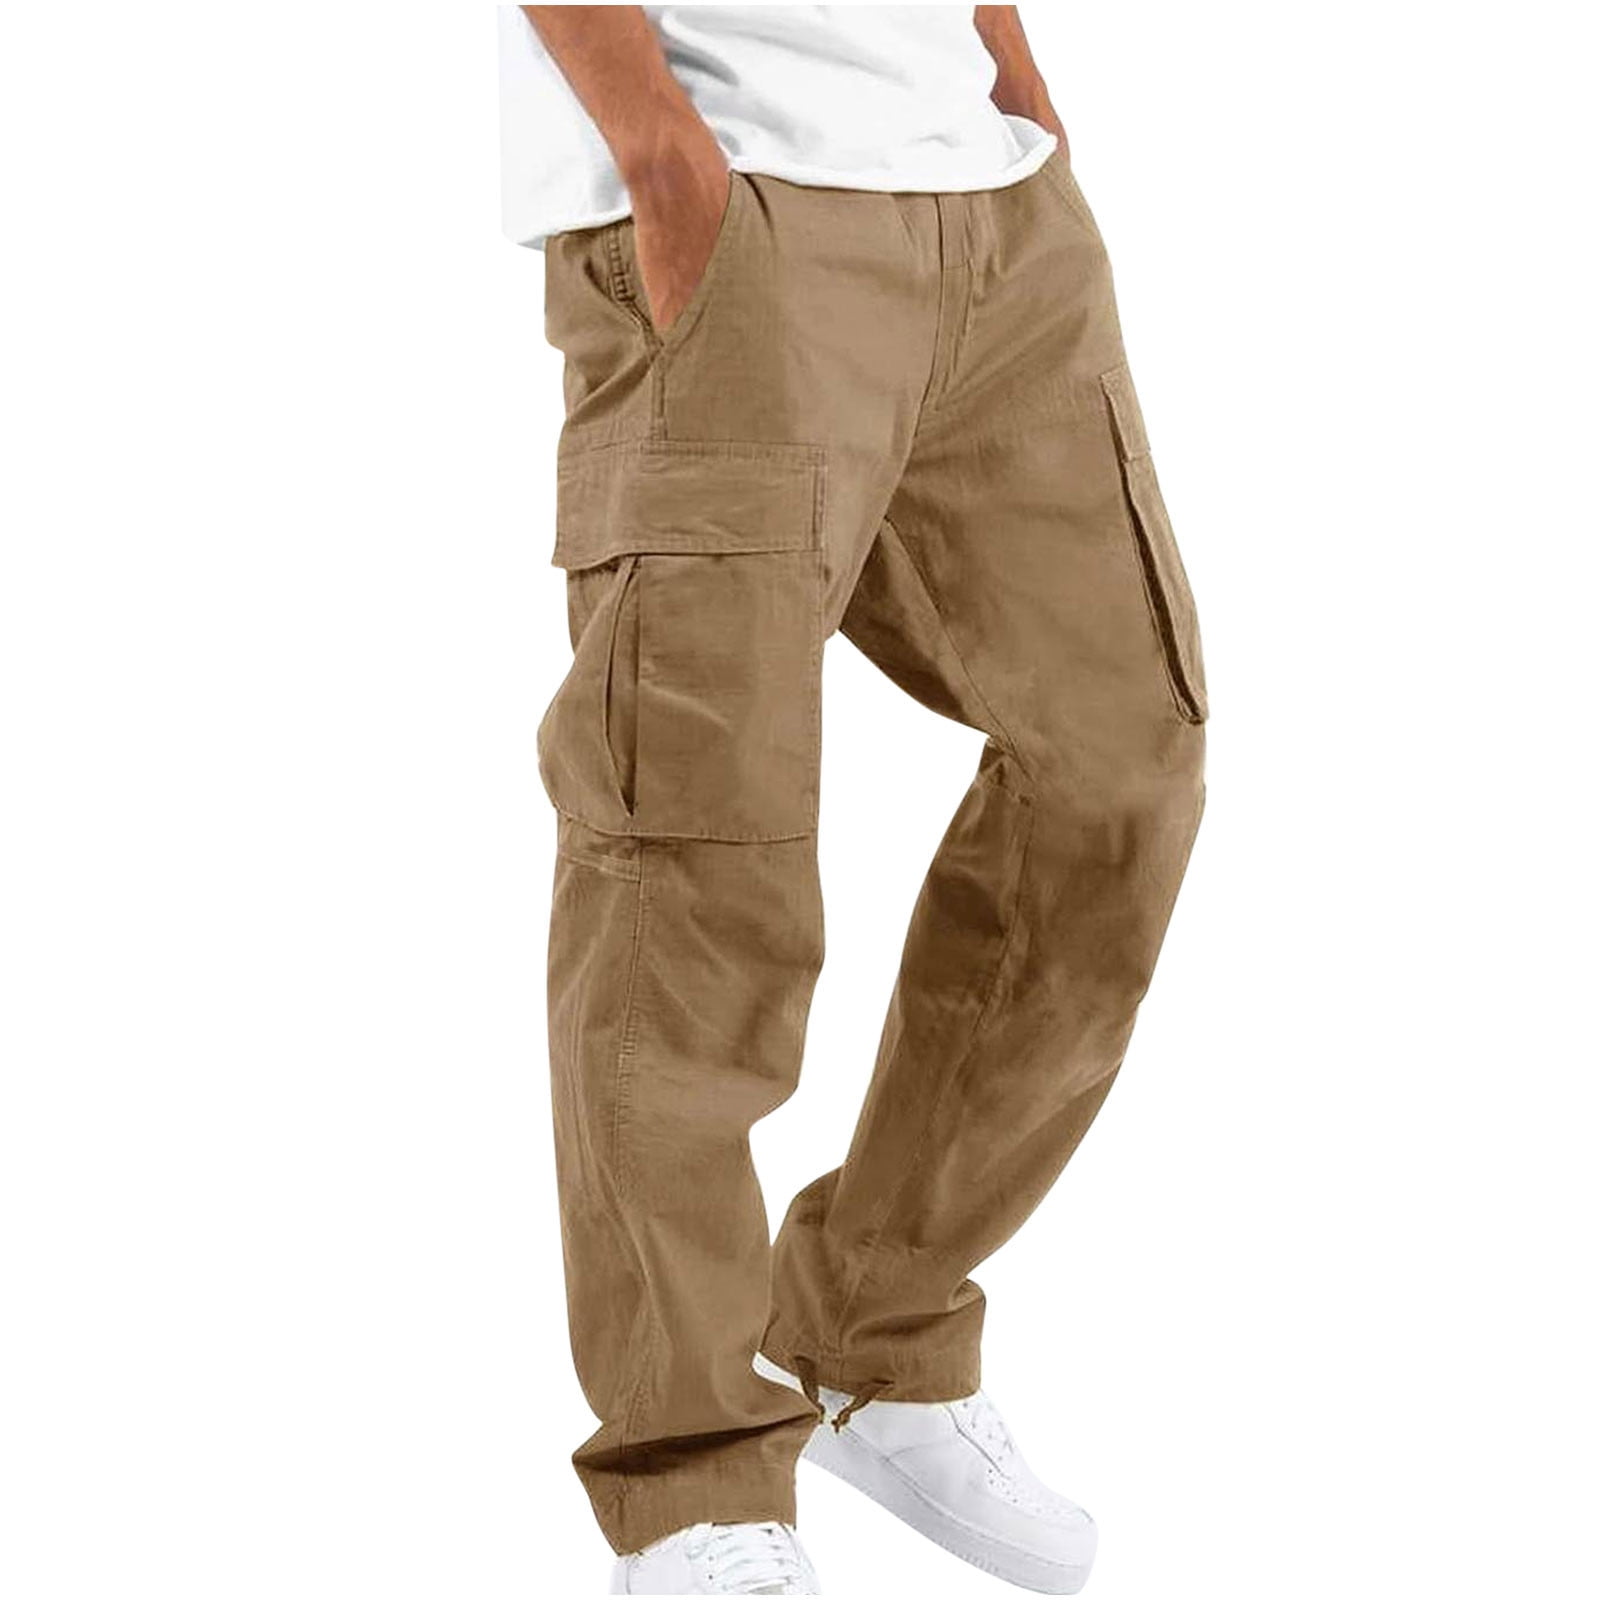 Clearance Cargo Pants for Men Fleece Lined Thermal Pants Relaxed Fit ...